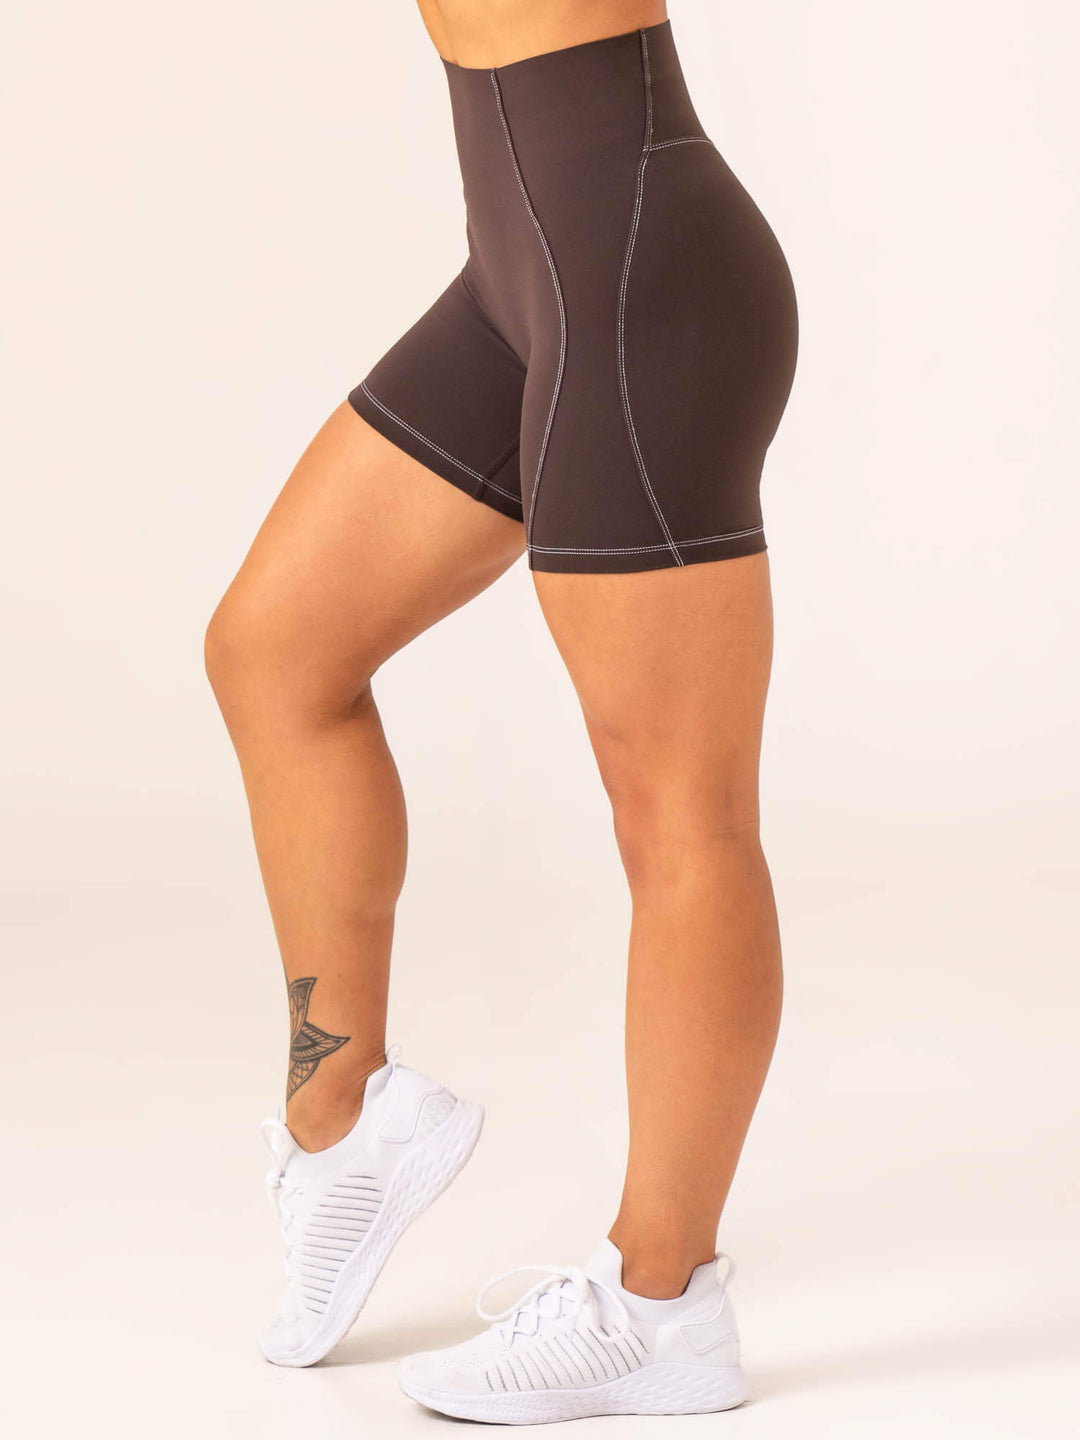 Stride High Waisted Shorts - Chocolate Clothing Ryderwear 